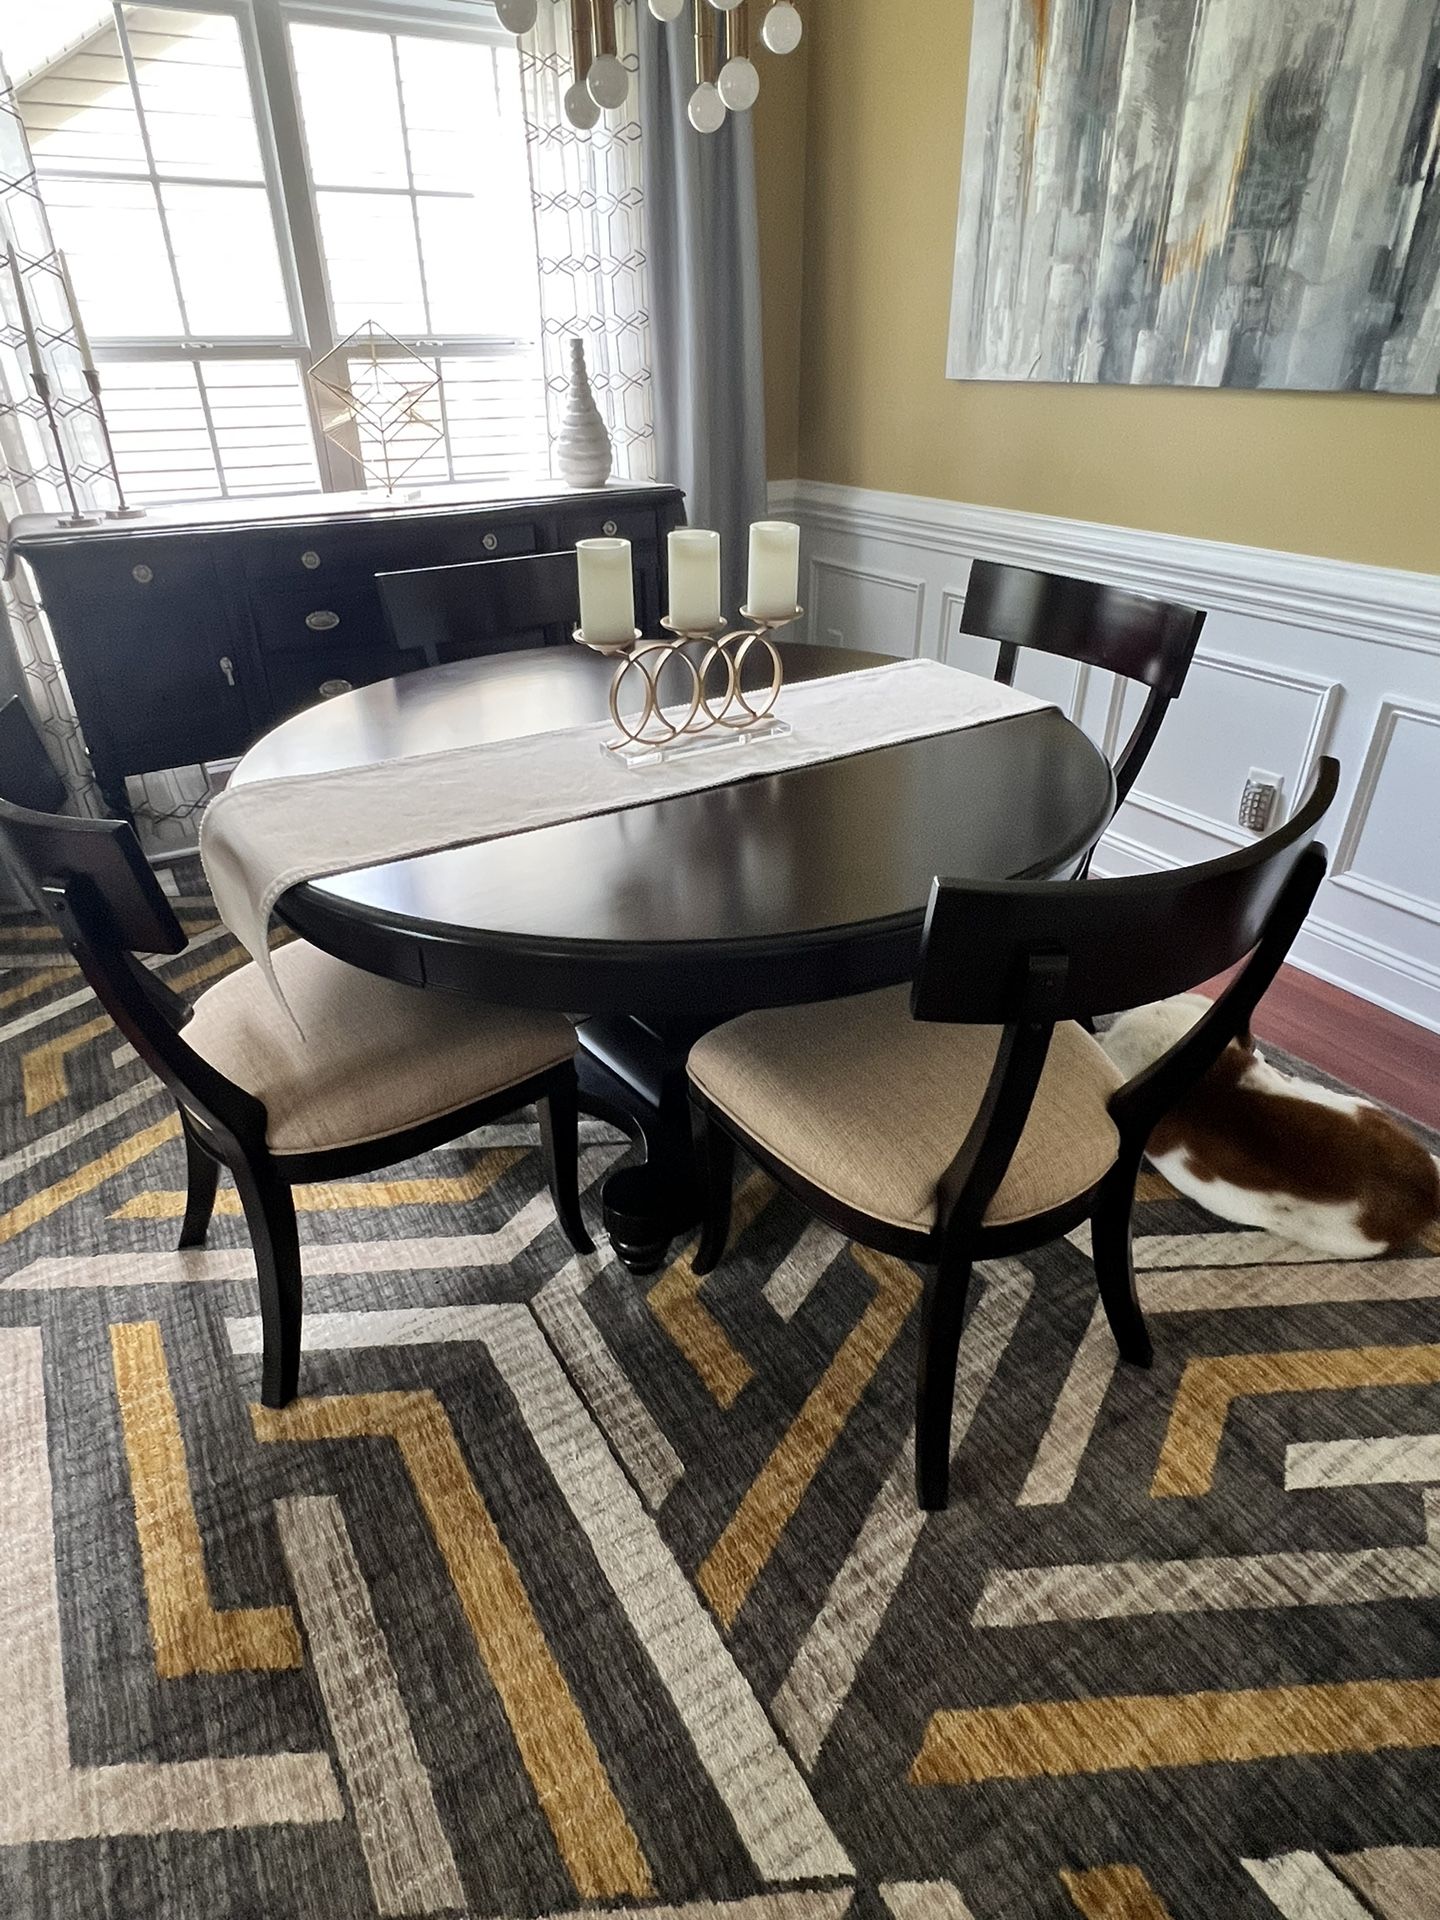 PENDING SALE - Dining Room Set with 4 Chairs and Sideboard